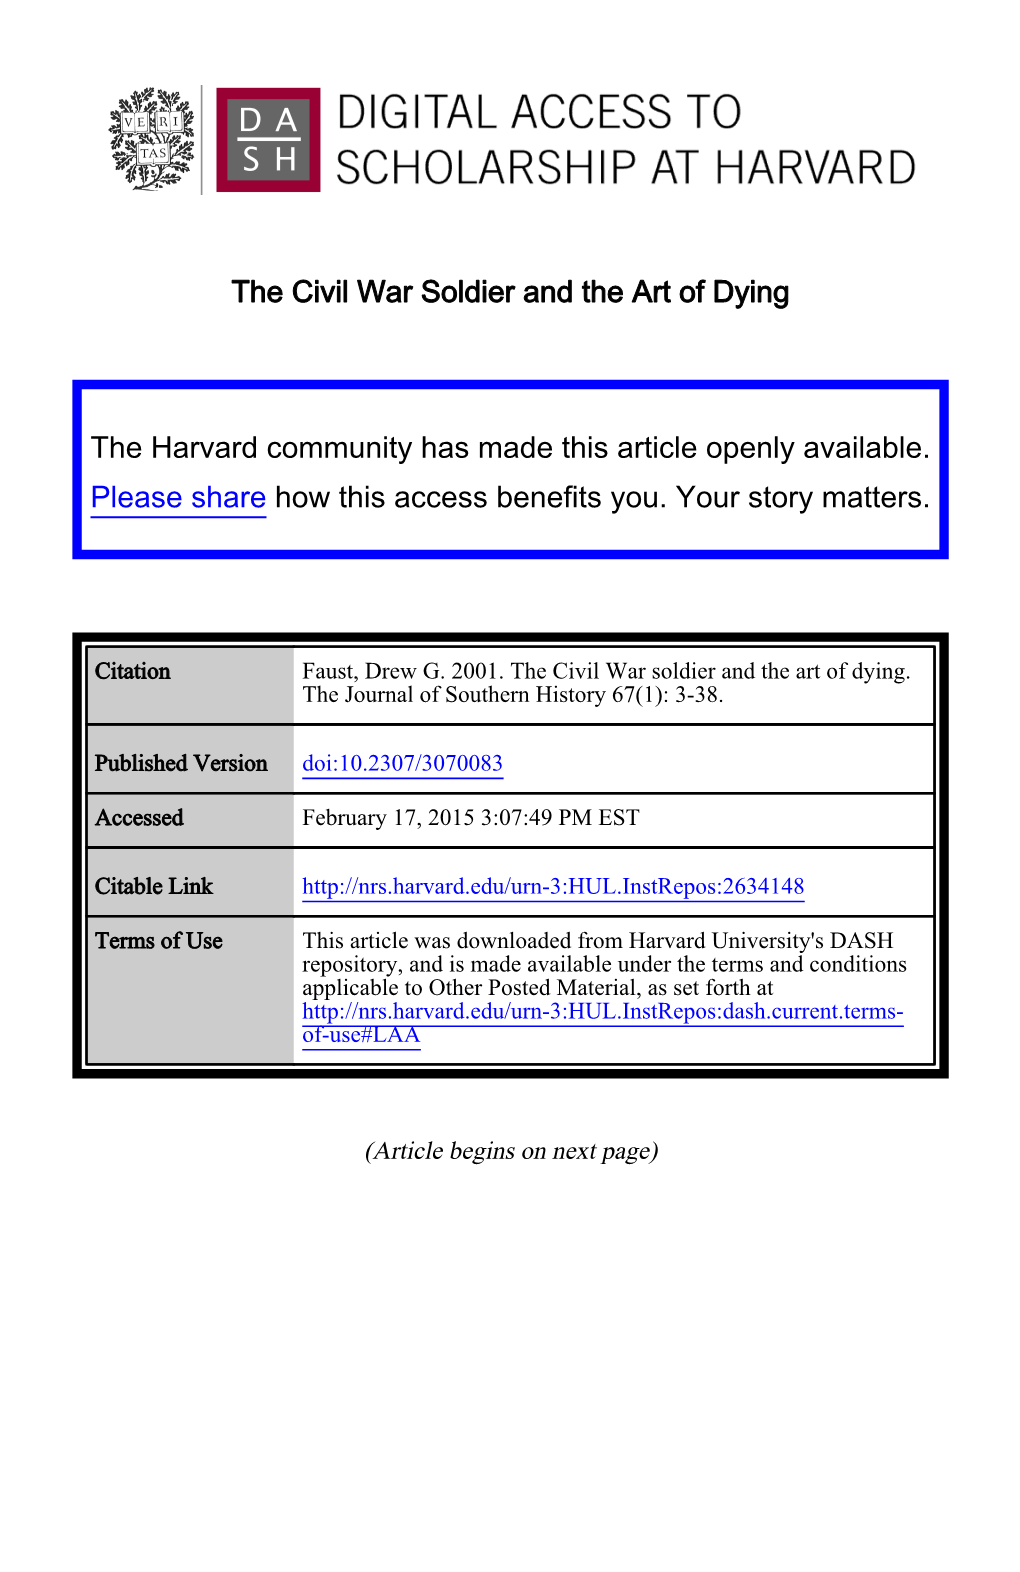 The Civil War Soldier and the Art of Dying